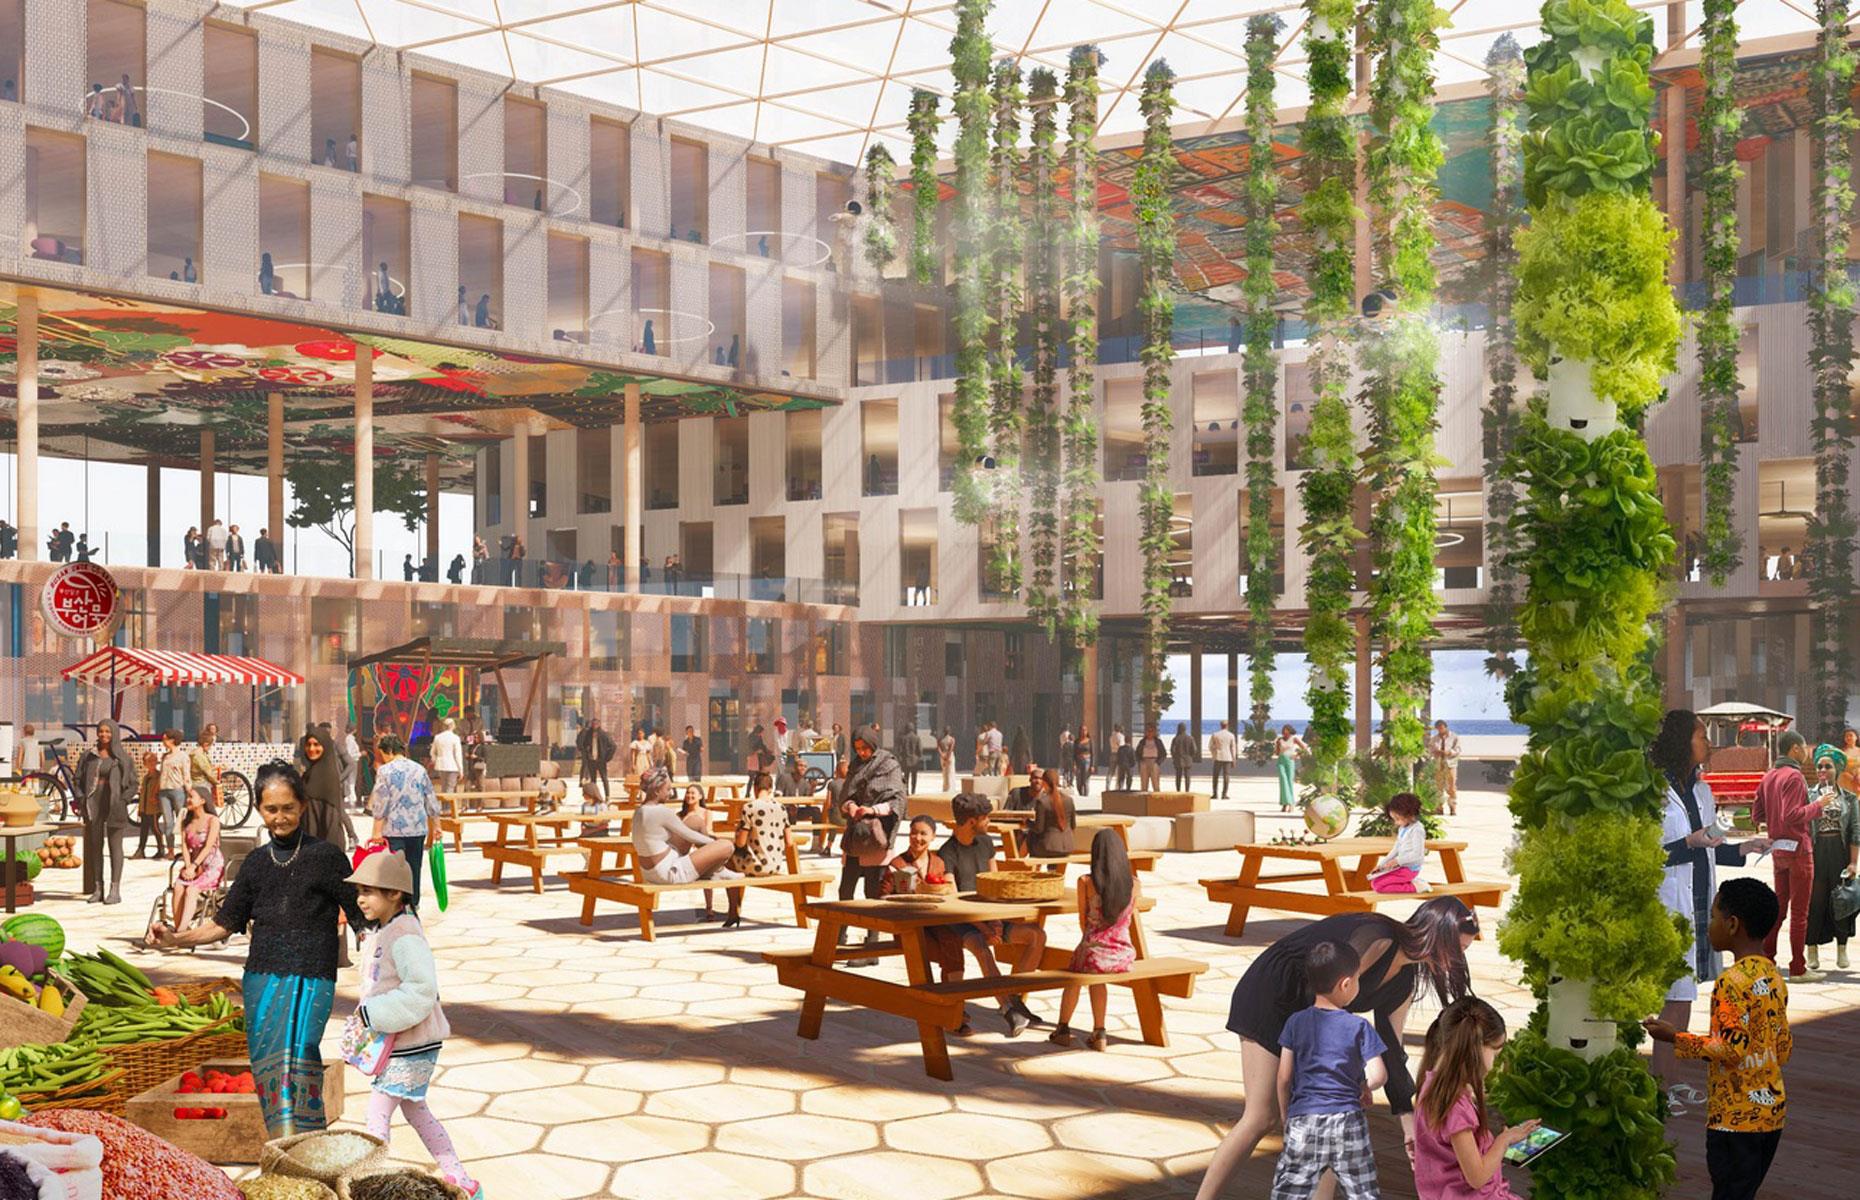 <p>The Research Platform is the city's co-working and maritime study hub and will feature a climate-controlled central atrium and vertical forest farm. The Living Platform is where inhabitants will reside, as you might have guessed. It's set to consist of low-rise residential towers made from bamboo, characterful alleys with local food sellers and stores, and a public park that will host regular cultural activities. The Lodging Platform will complement its two siblings with an eco-hotel and retail stores, organic restaurants and greenhouses and several communal terraces.</p>